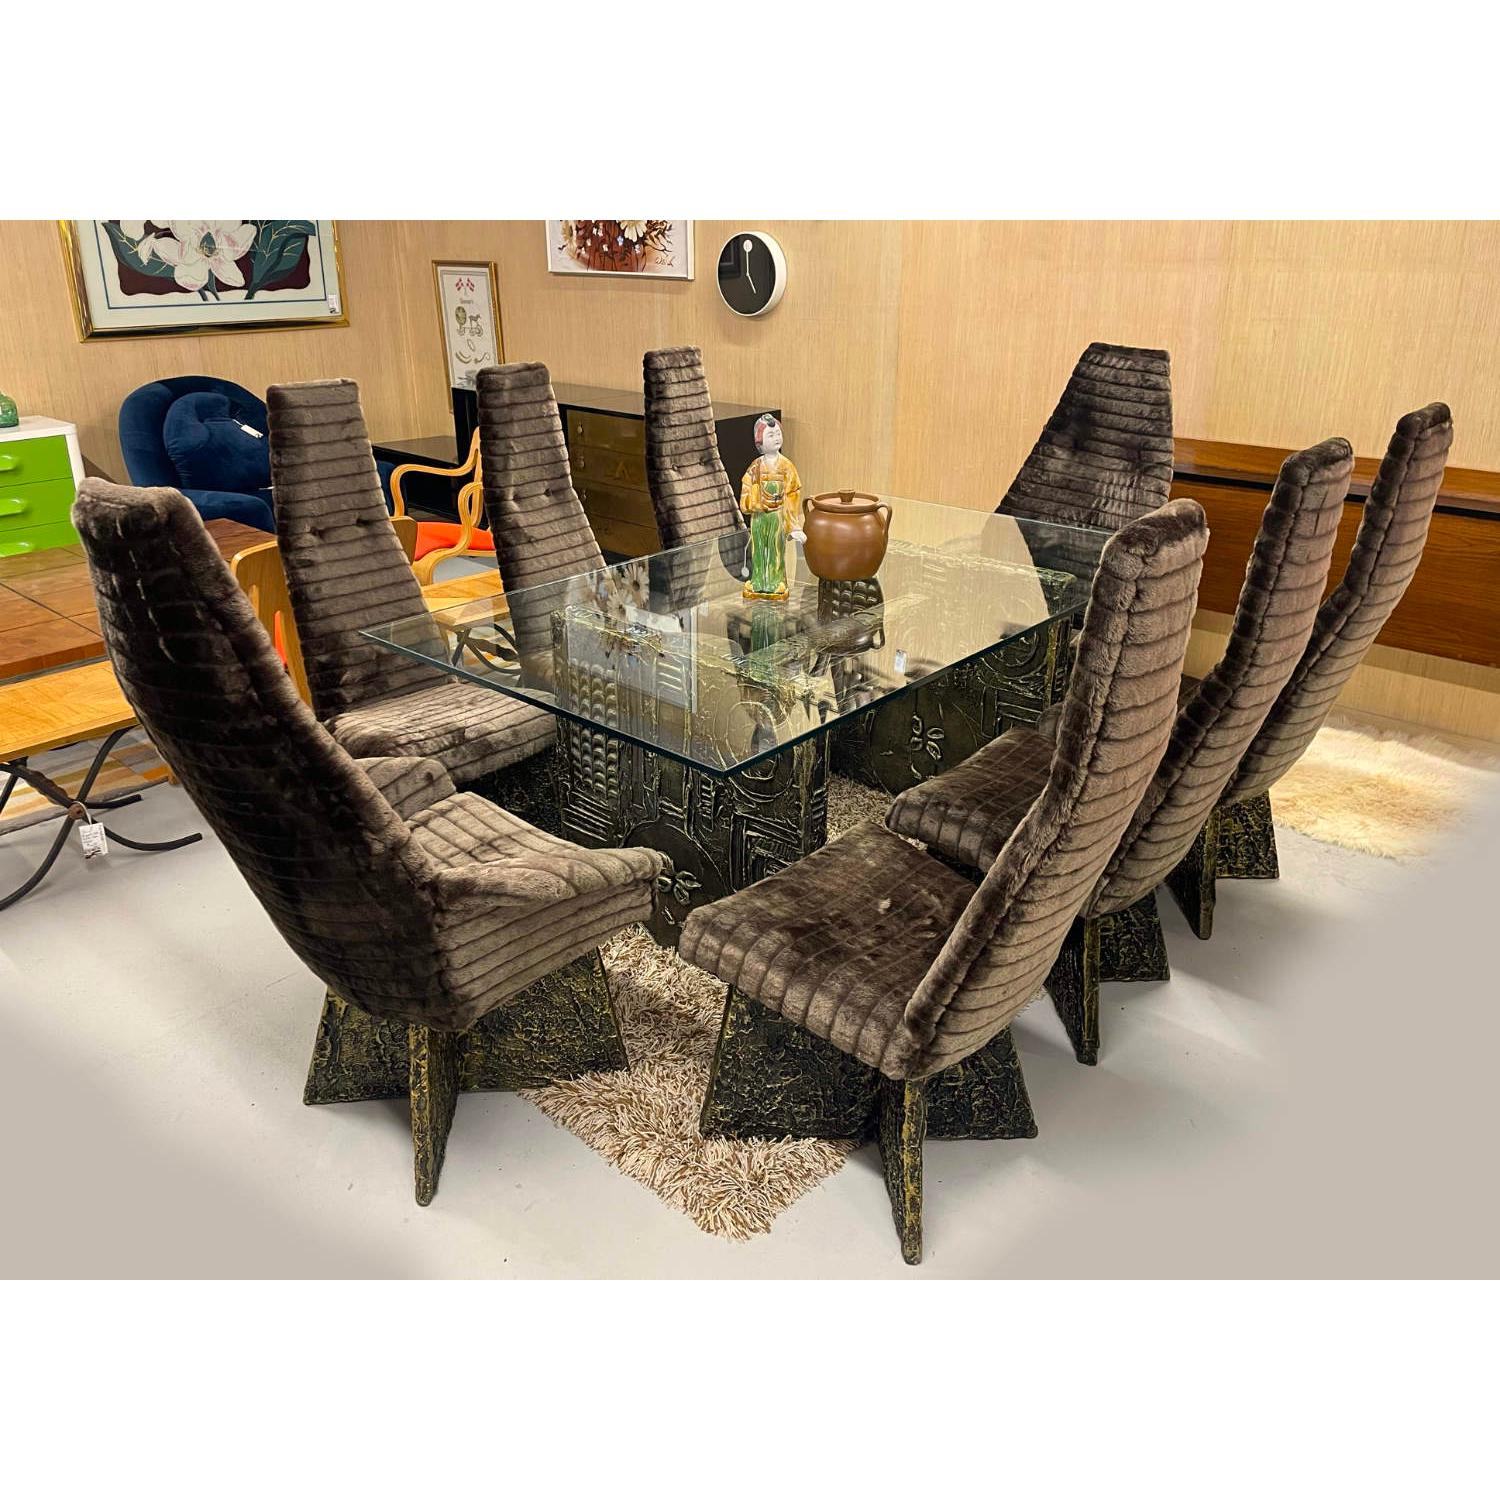 This listing is for the table alone. The dining chairs pictured are sold separately. 

Craft Associates Brutalist glass top dining table. This rectangular, glass-topped table can also be used as a desk. This vintage 1970s table borrows from famed